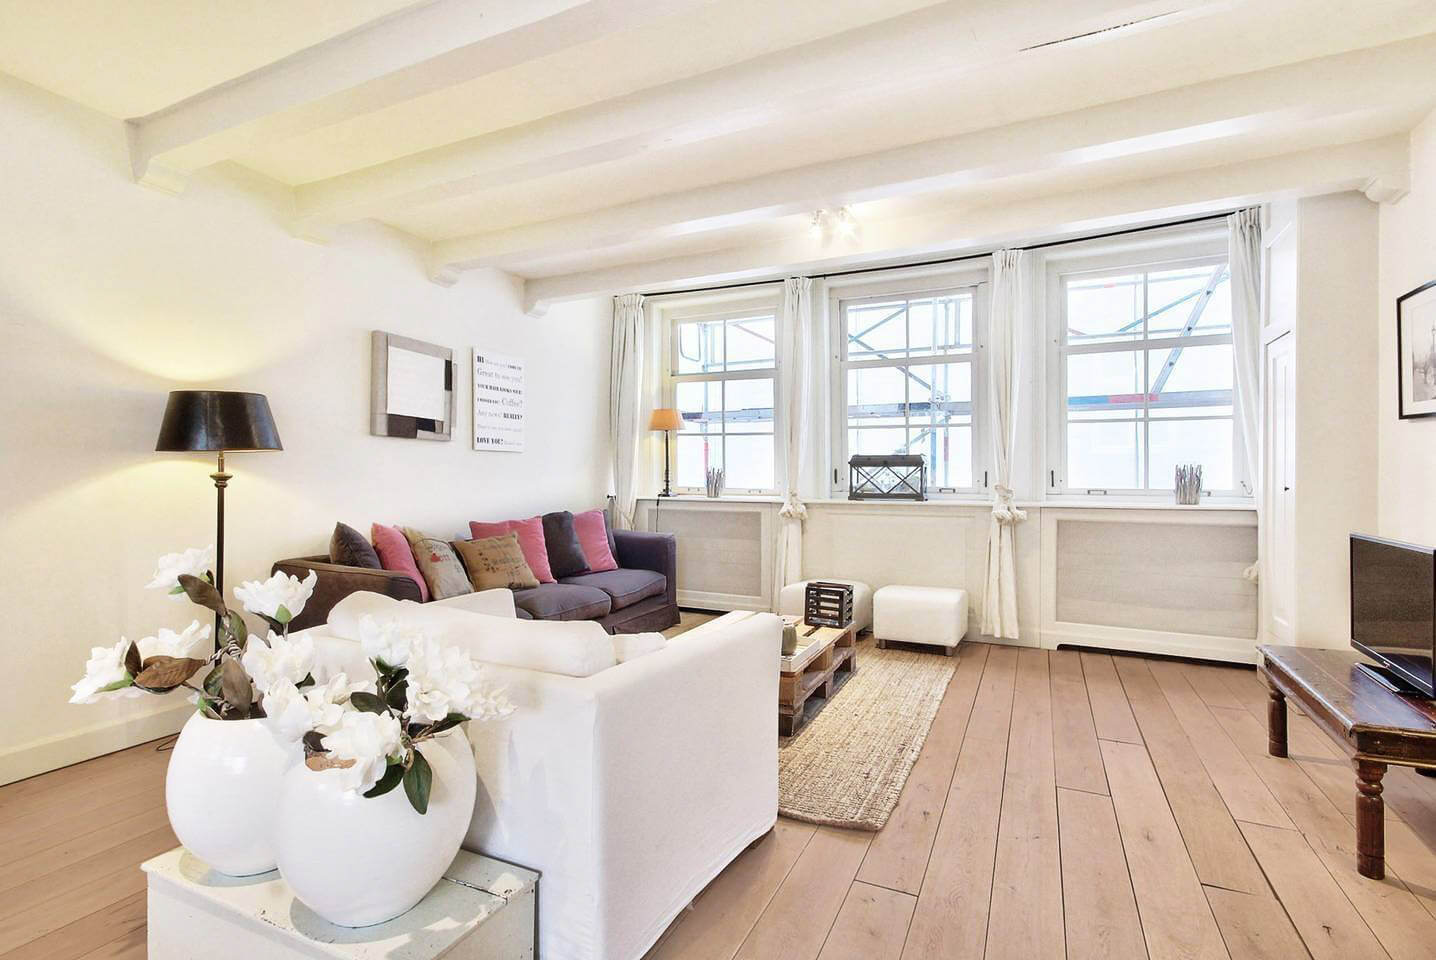 Amsterdam rental homes and apartments on Airbnb are much cheaper than hotels